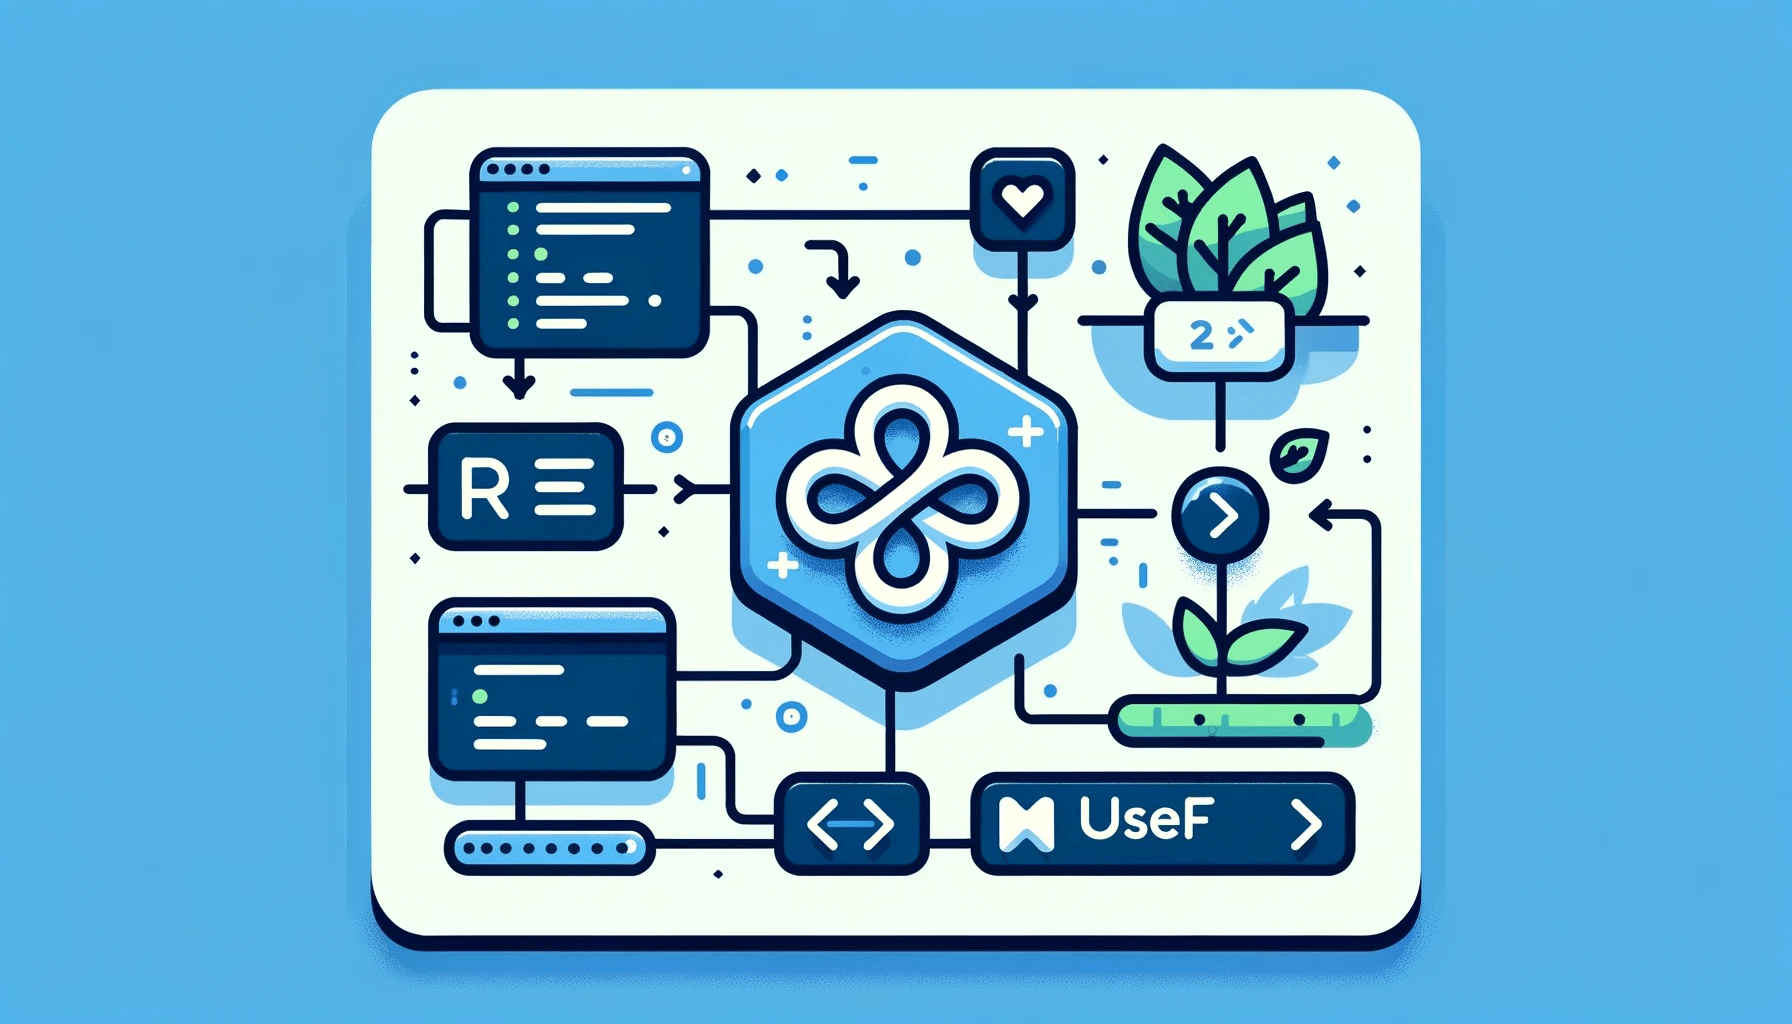 React Development Made Easy: Working with the useRef Hook